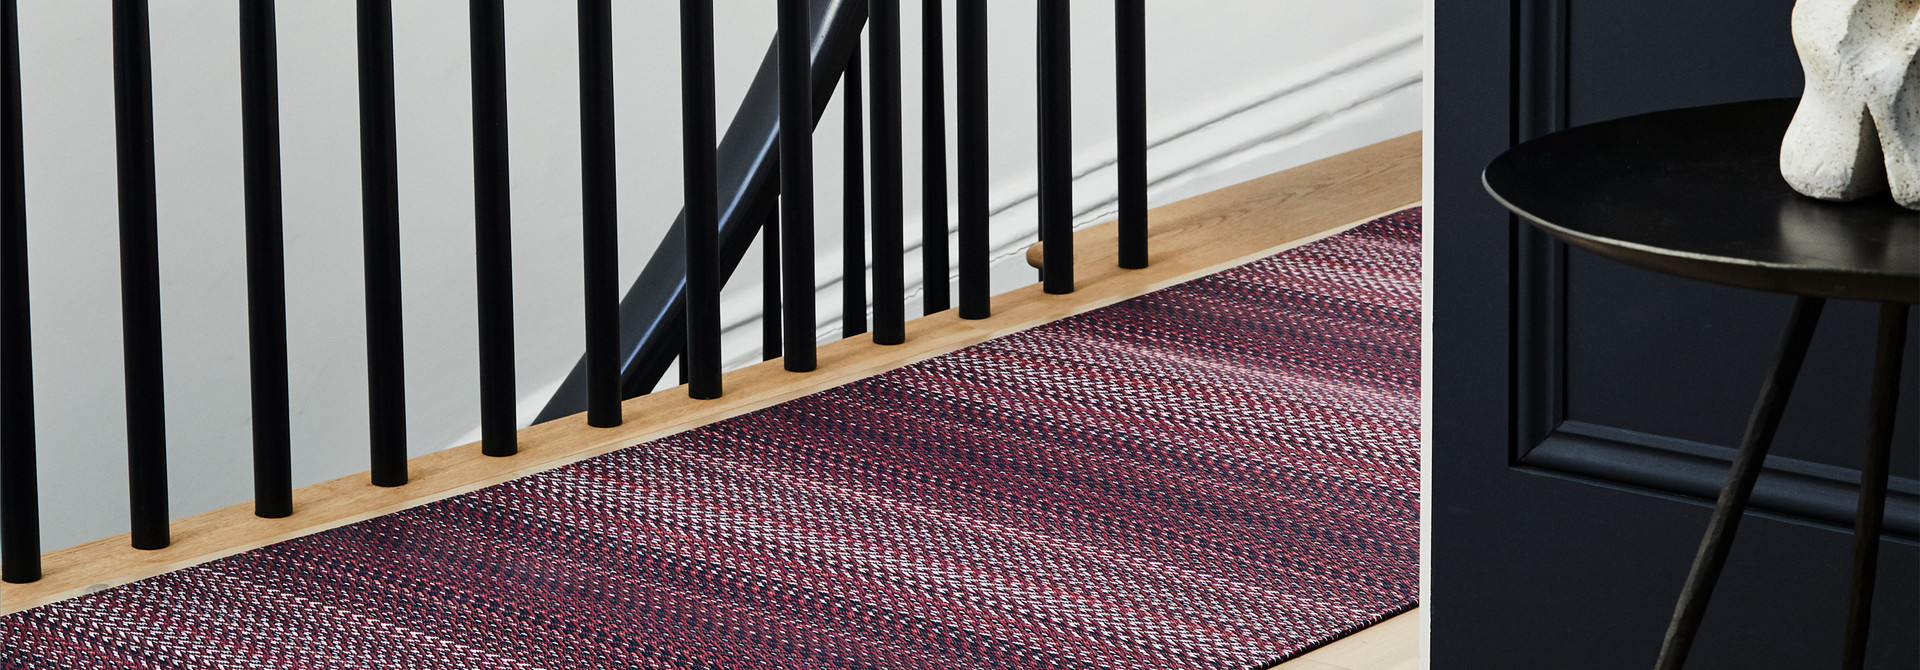 WOVEN | The Foyer & Great Room Collection